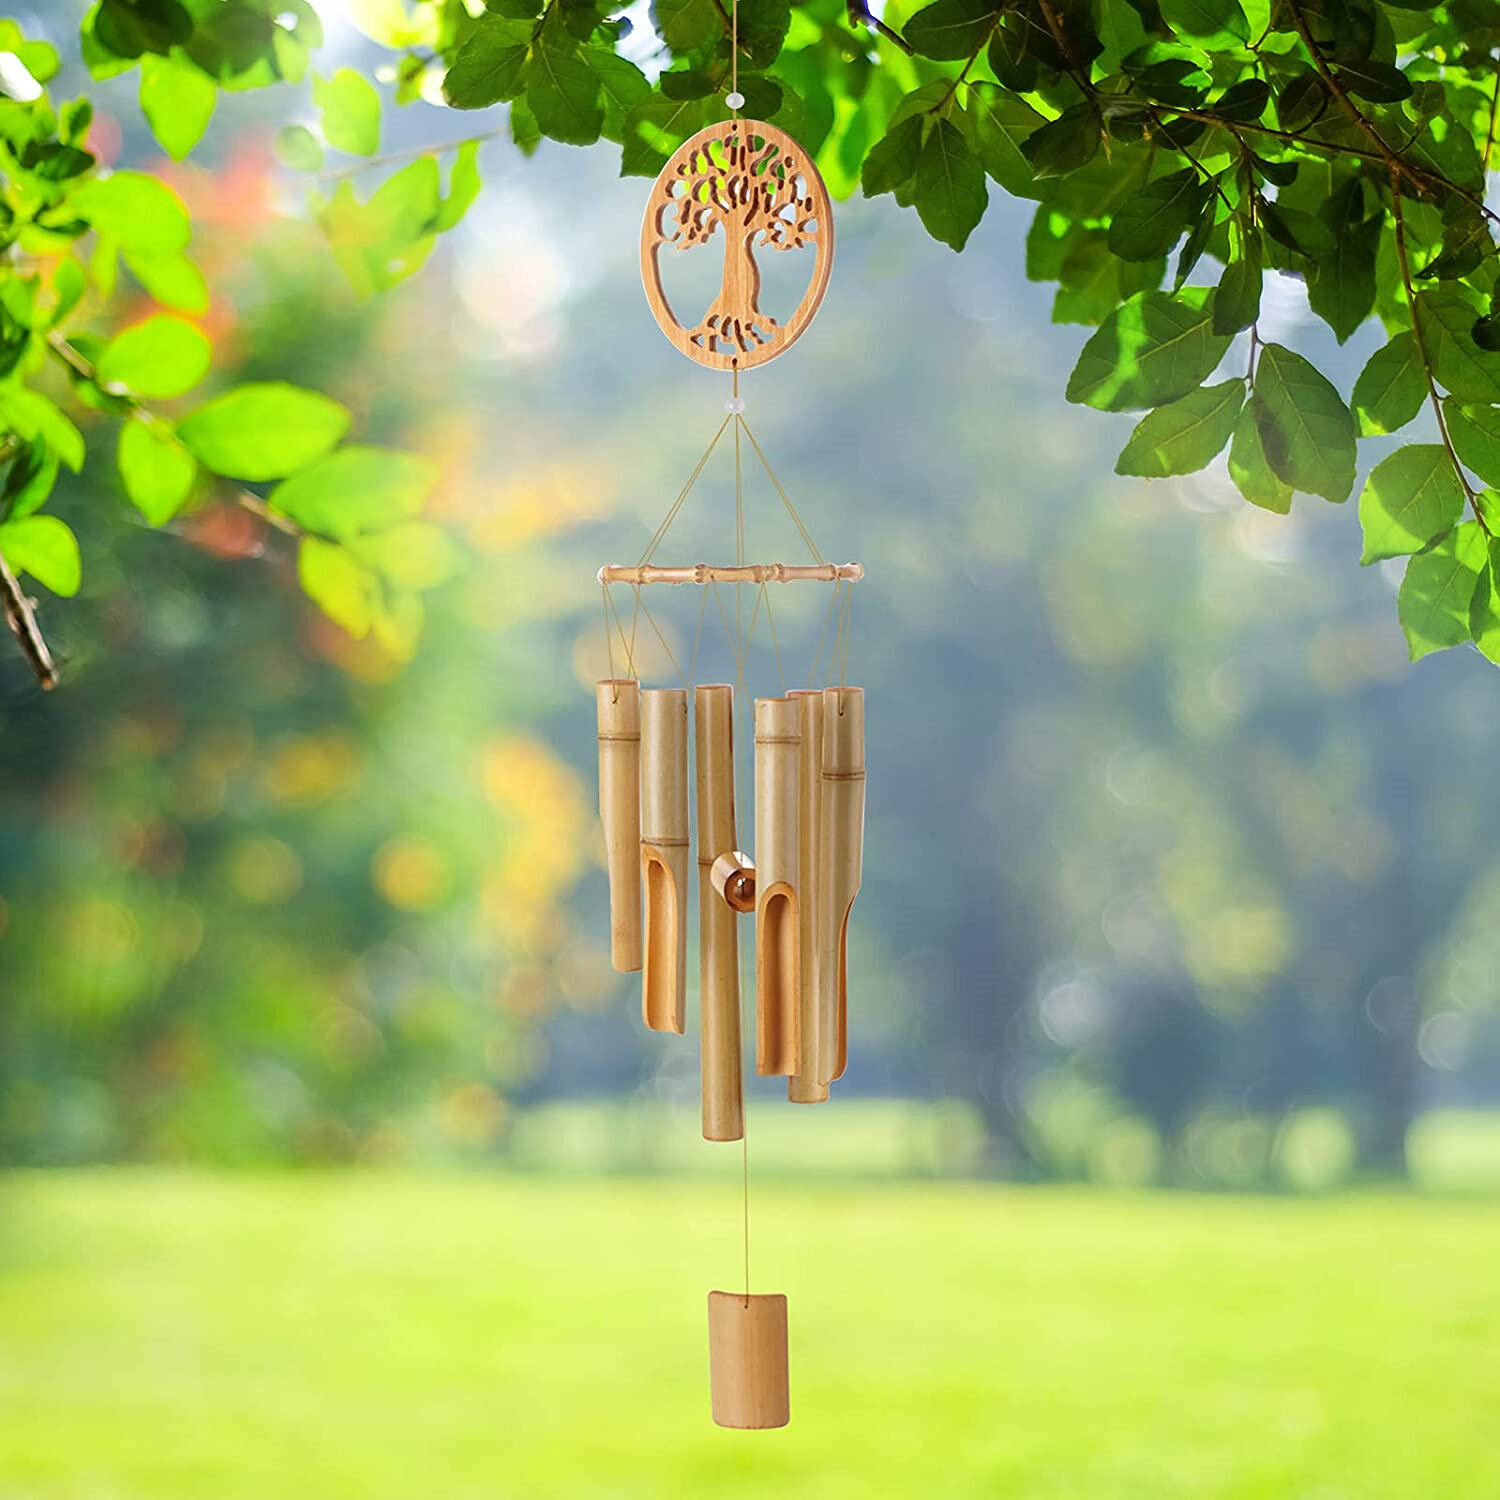 Tree of Life Wind Chime Metal Hanging Ornament Garden Outdoor Home Decor Gift